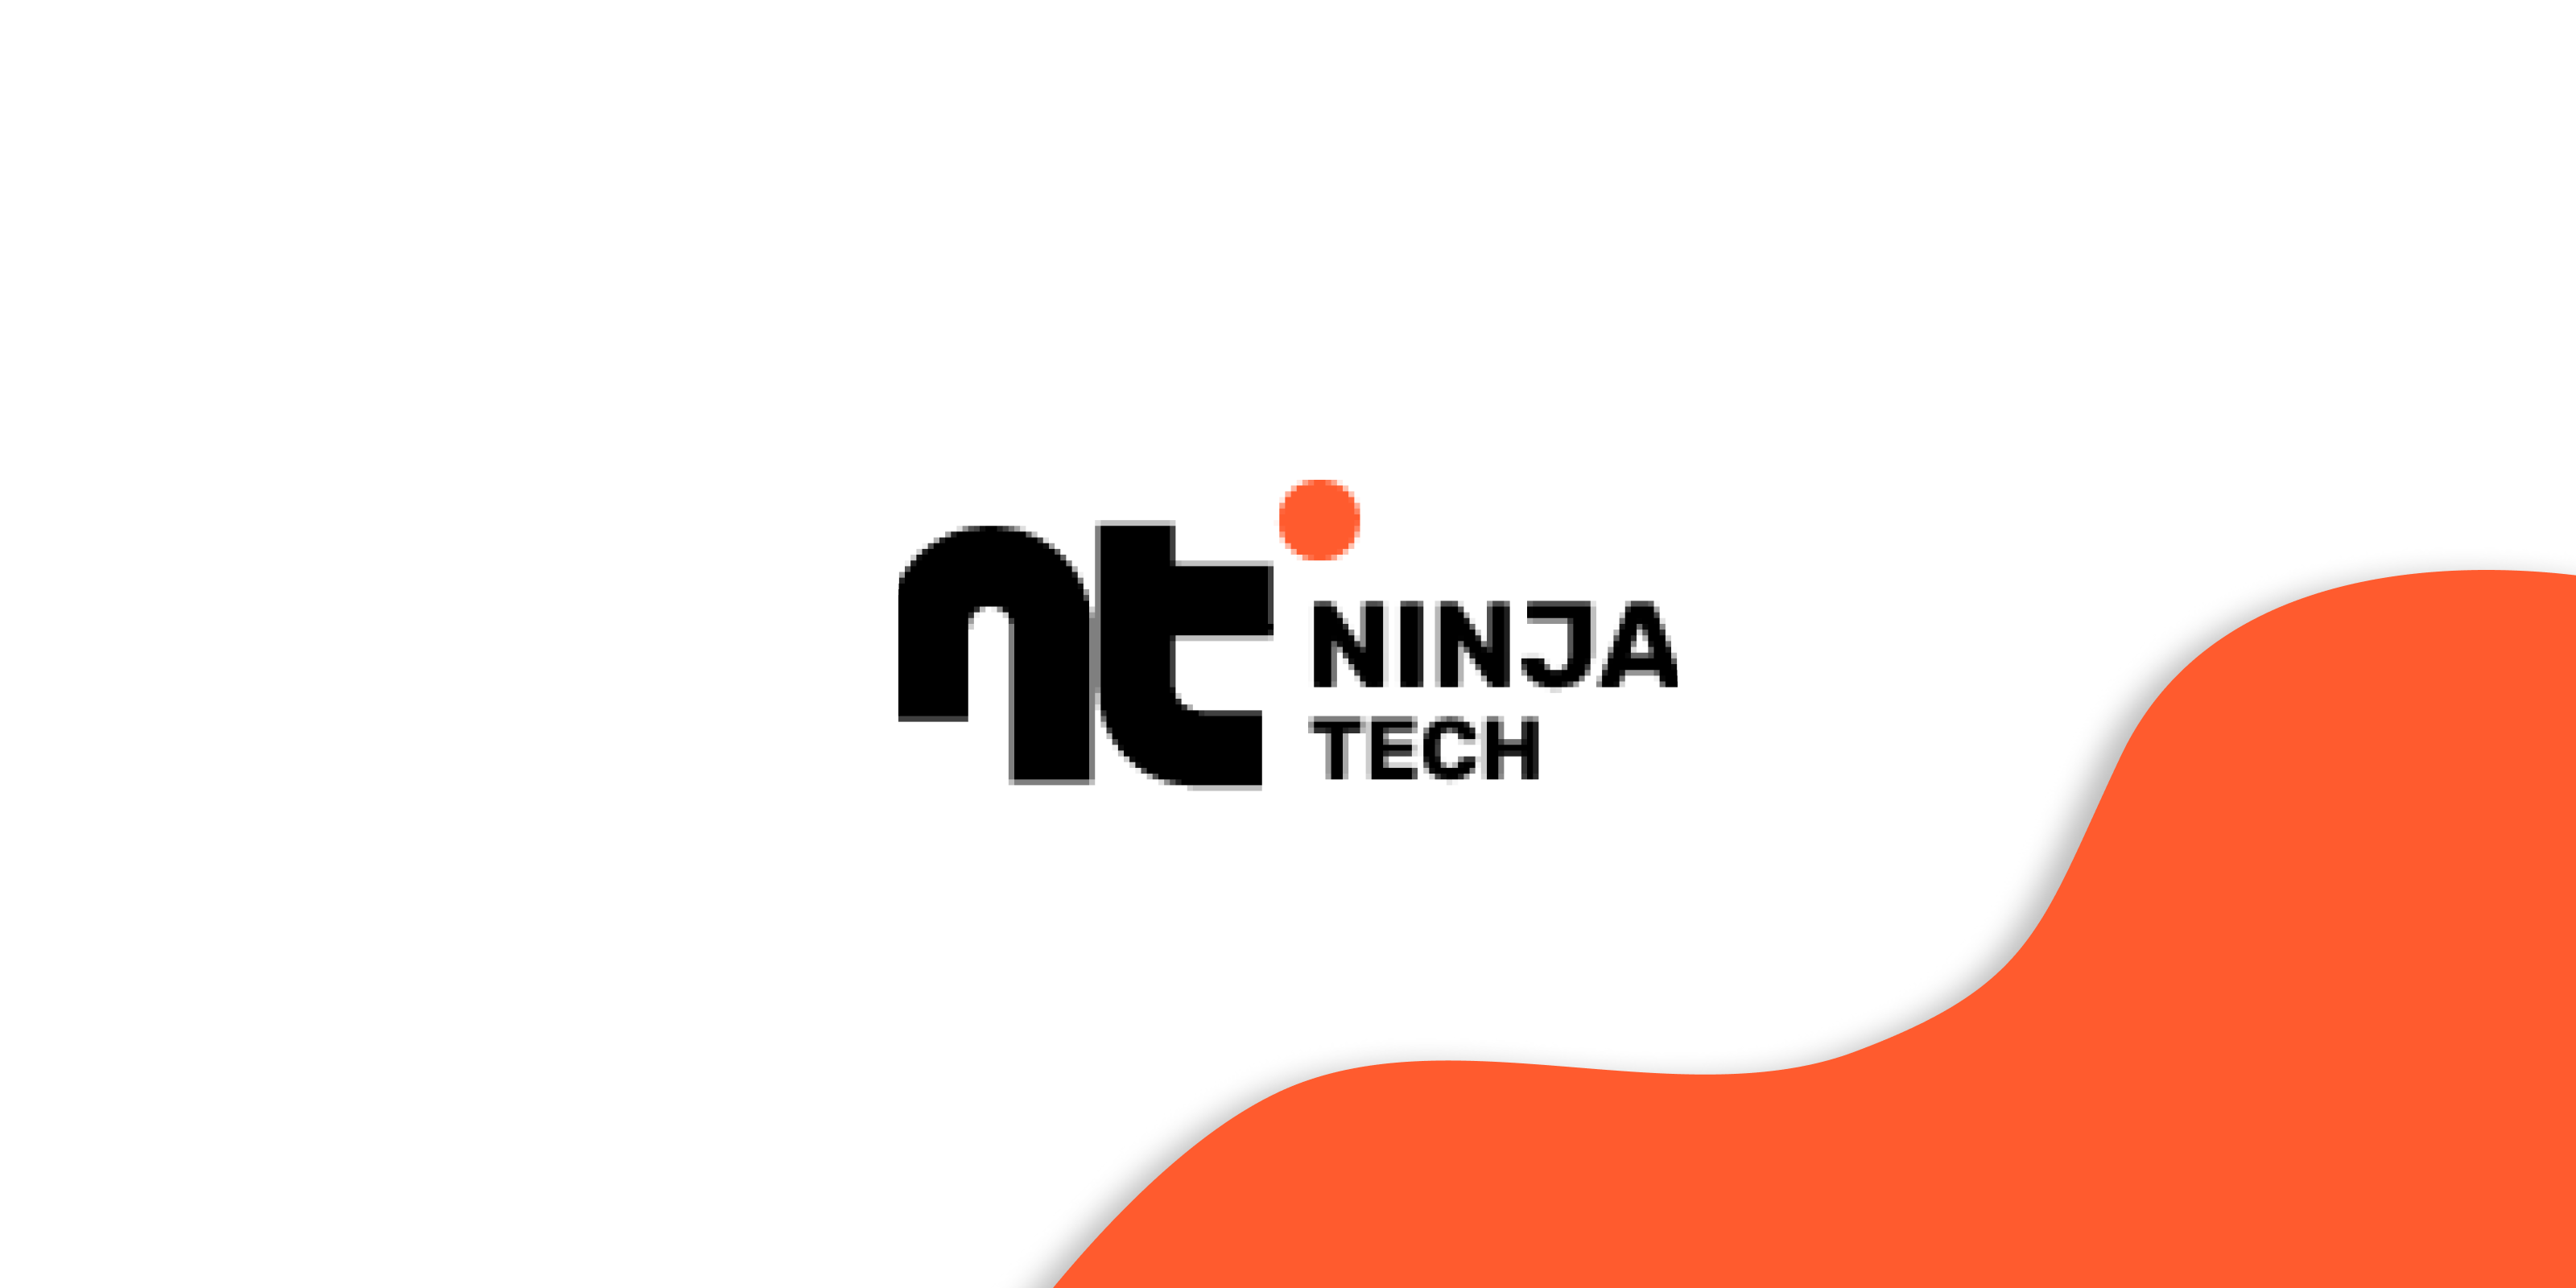 logo image for Ninja Tech company India for a blog on listing companies for node js in india